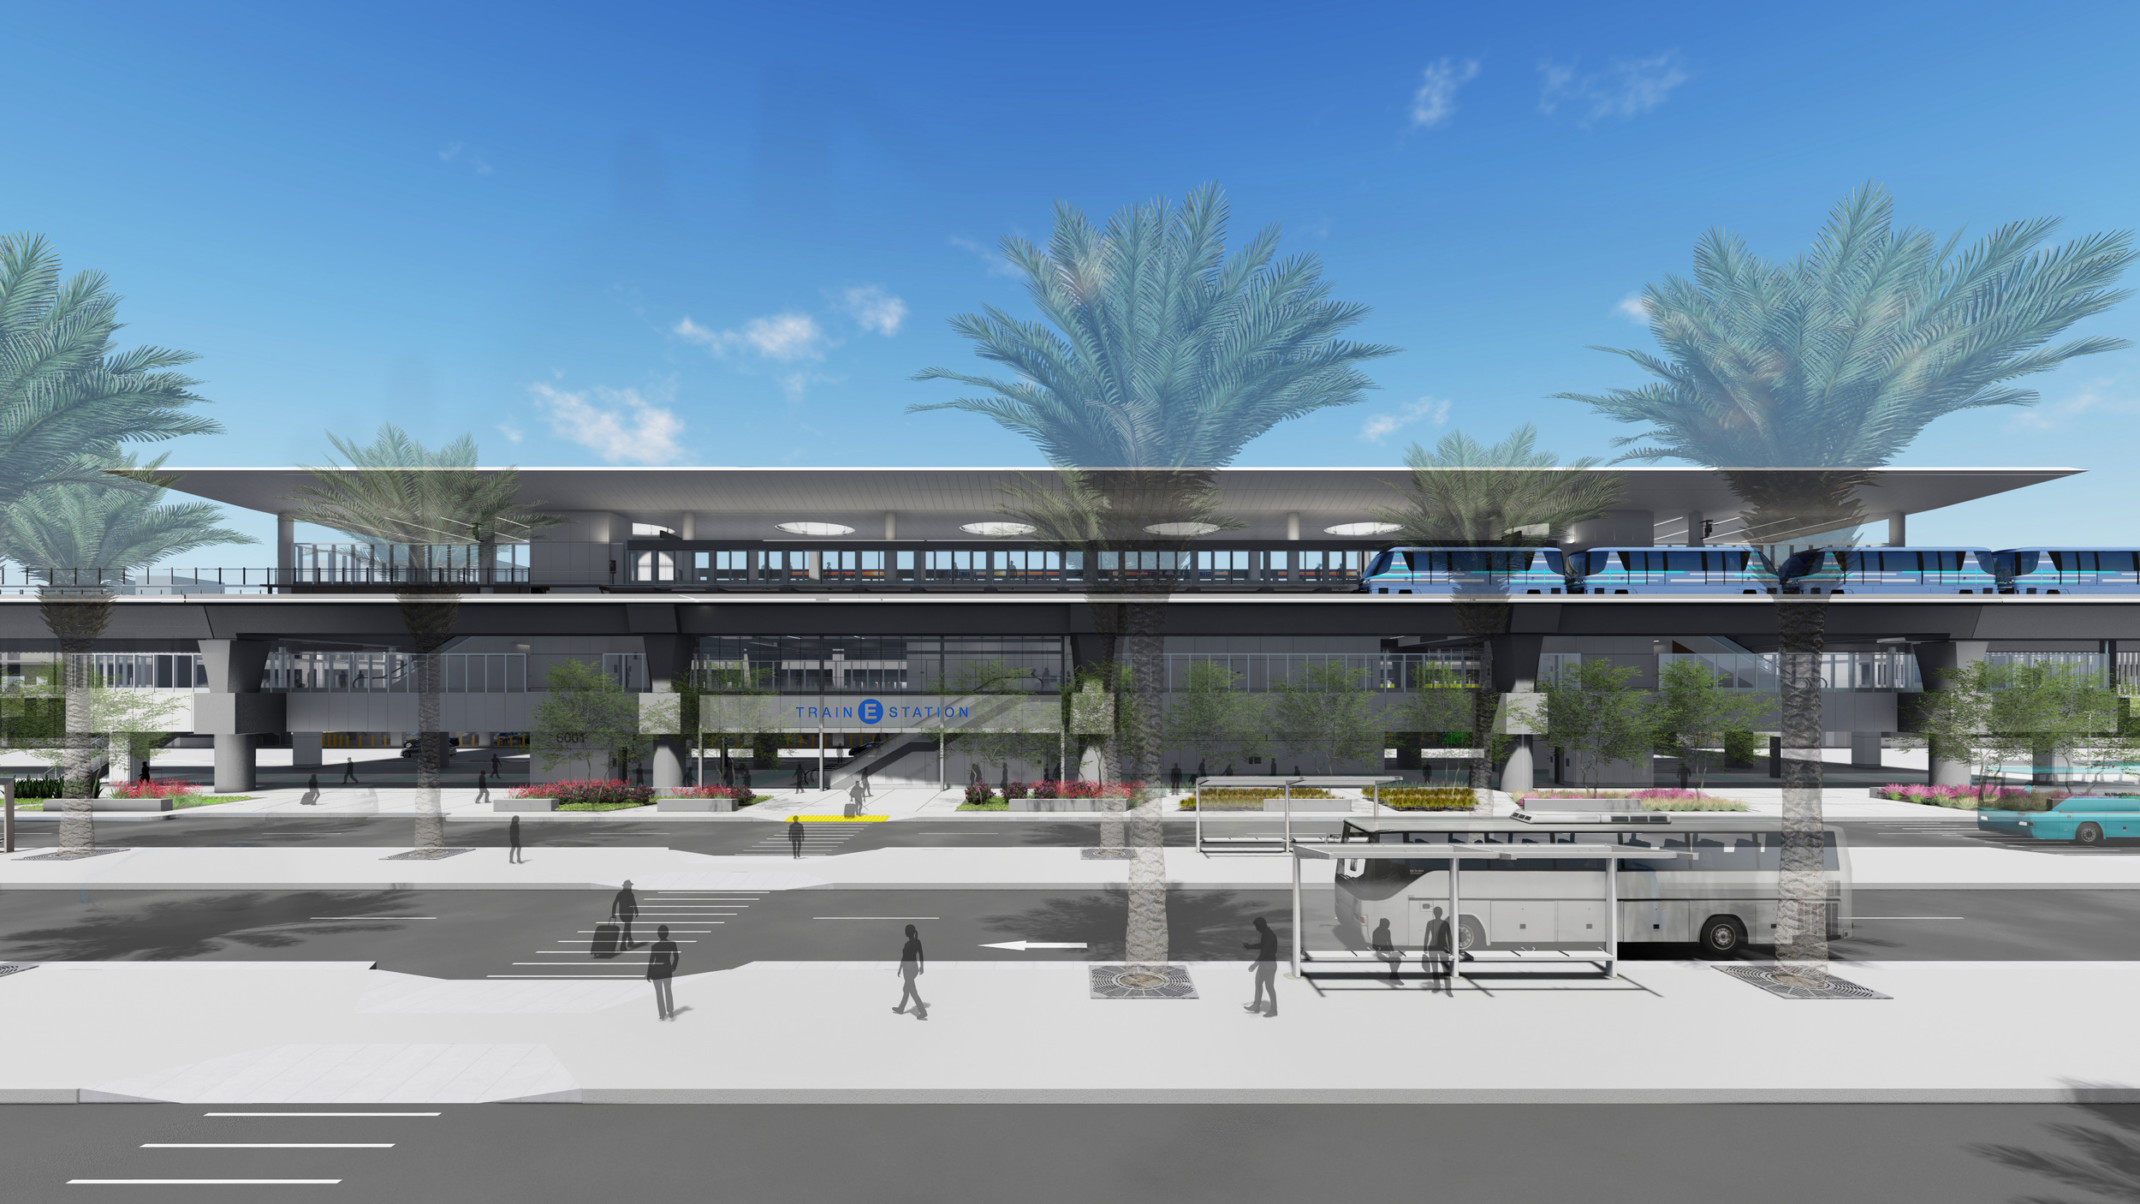 Los Angeles International Airport (LAX) Automated People Mover station concept design with elevated railway